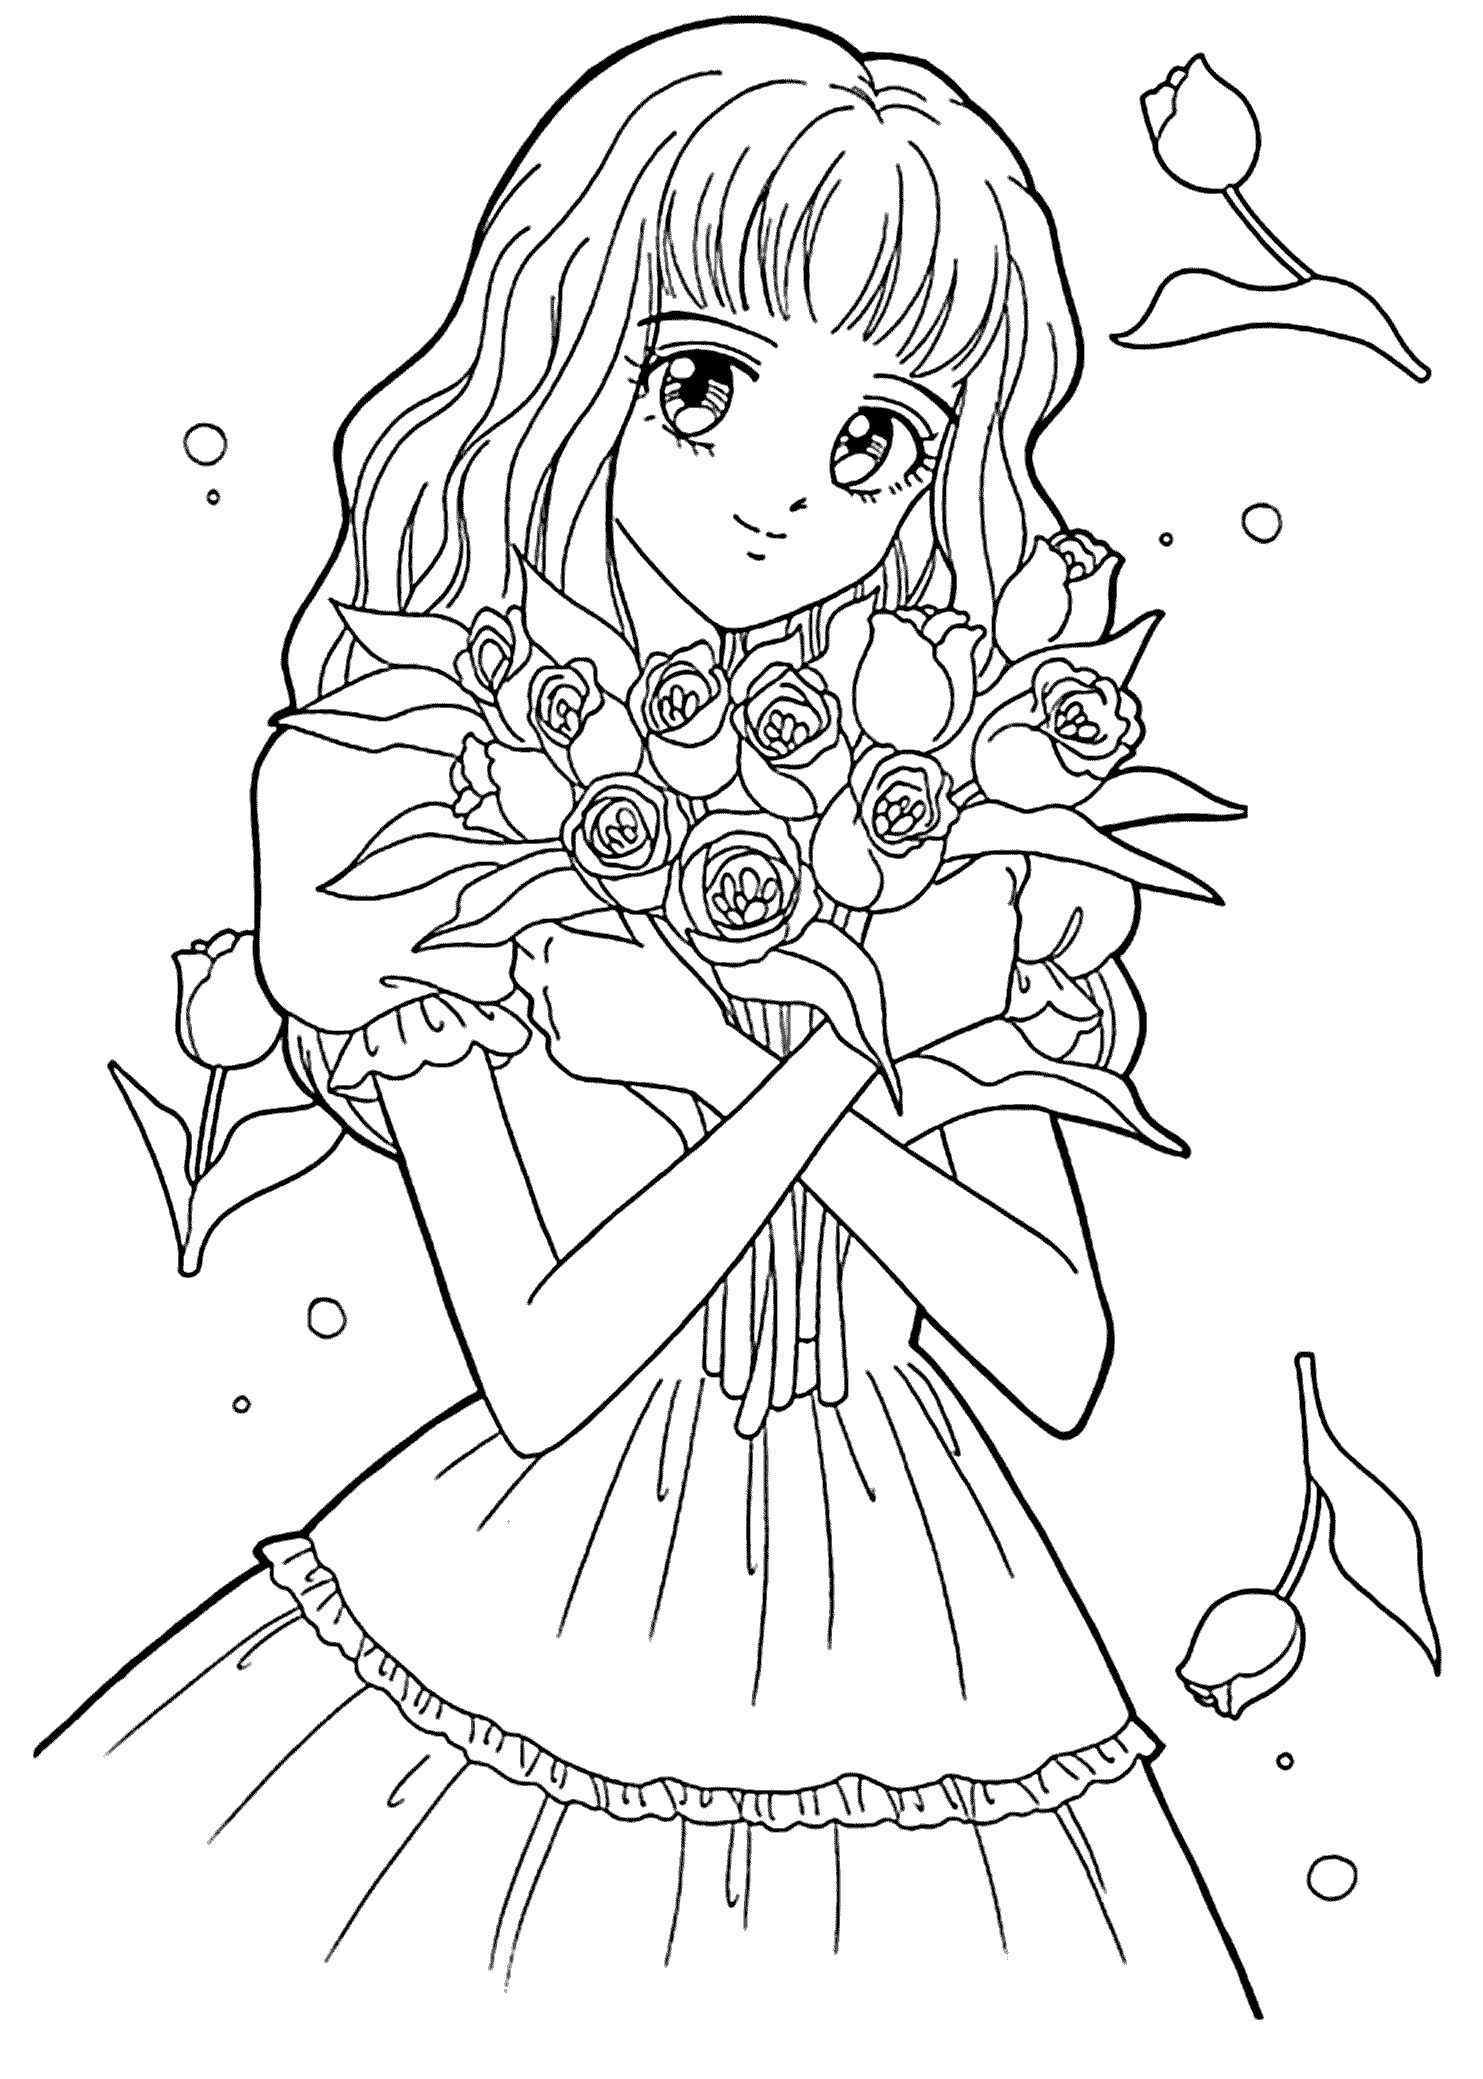 The 25 Best Ideas for Printable Coloring Pages for Teen Girls - Home ...